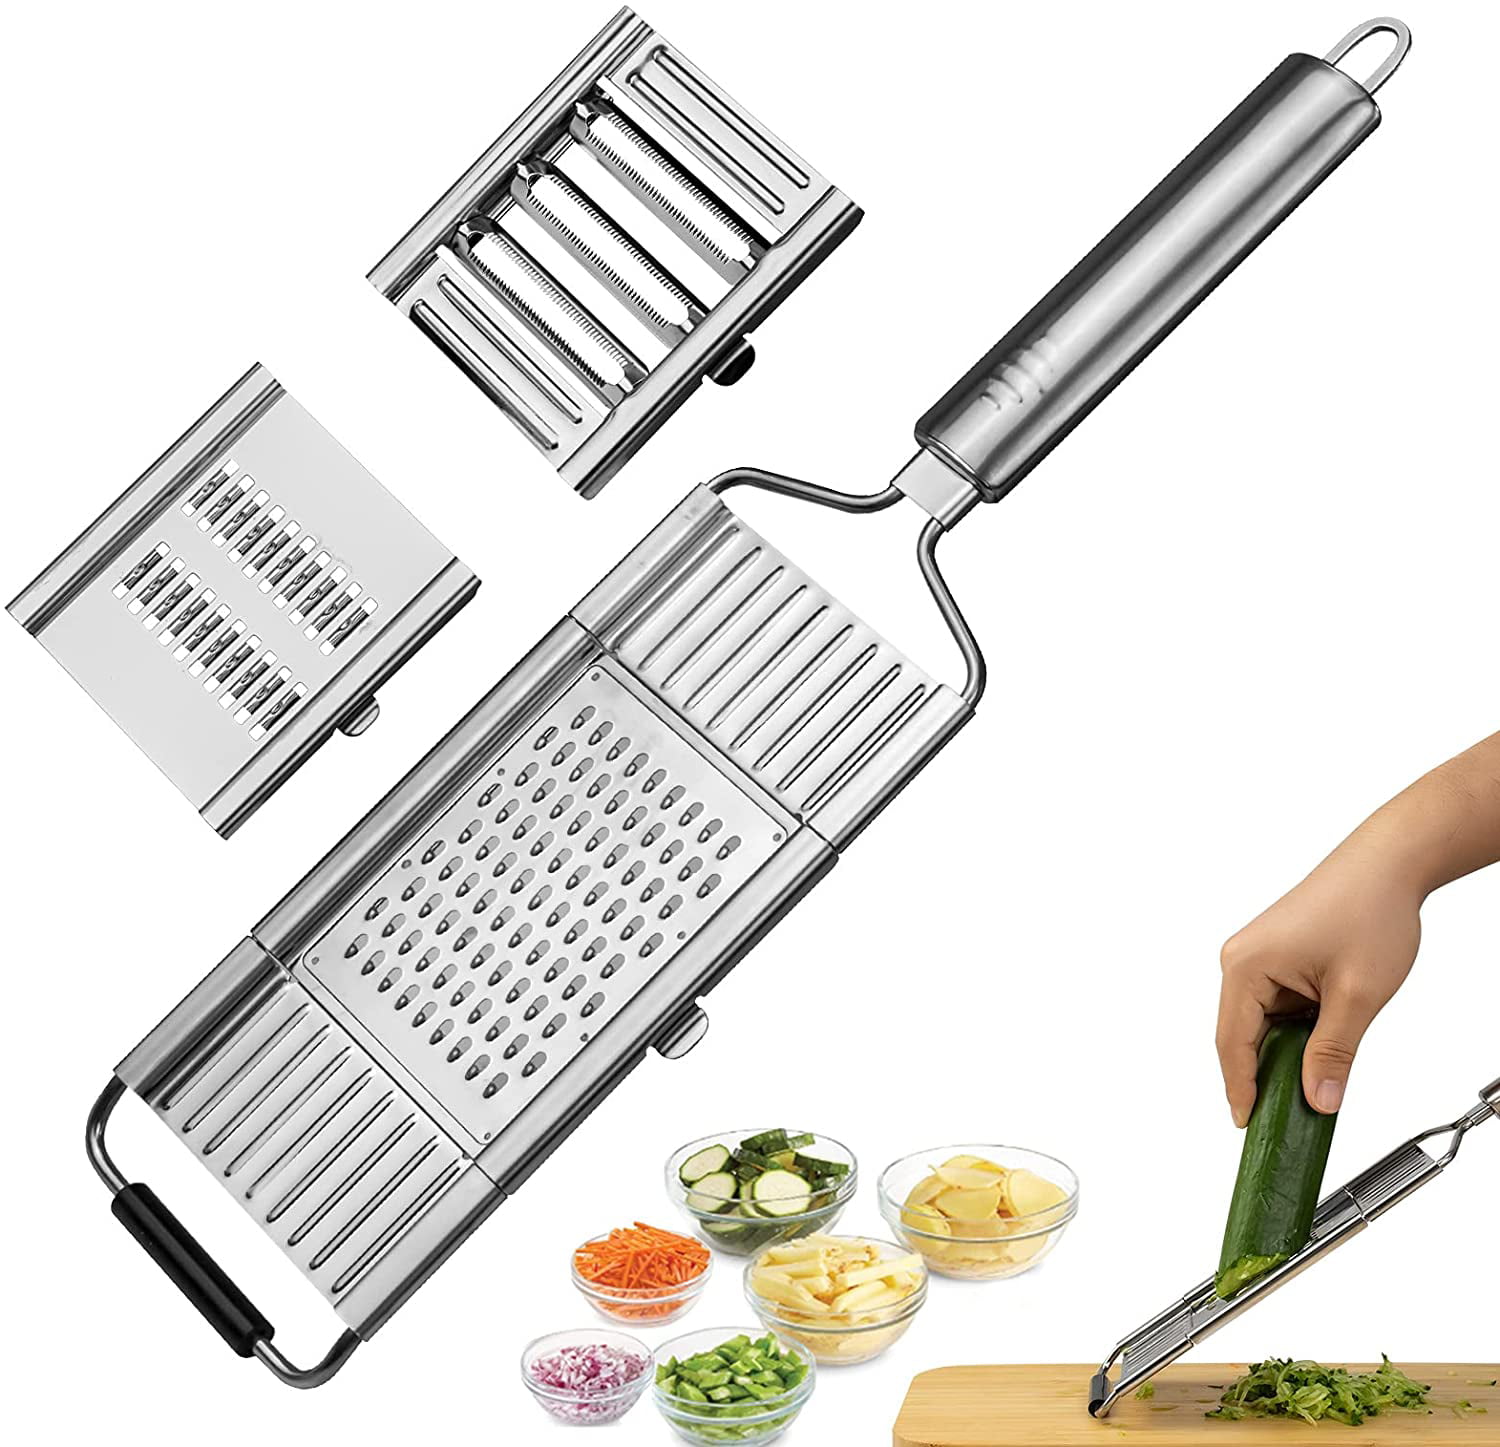 Keyi le Stylish and Easy To Clean Multi-Purpose Stainless Steel Manual Rotary Cheese Grater Slicer with 3 Interchanging Drums 